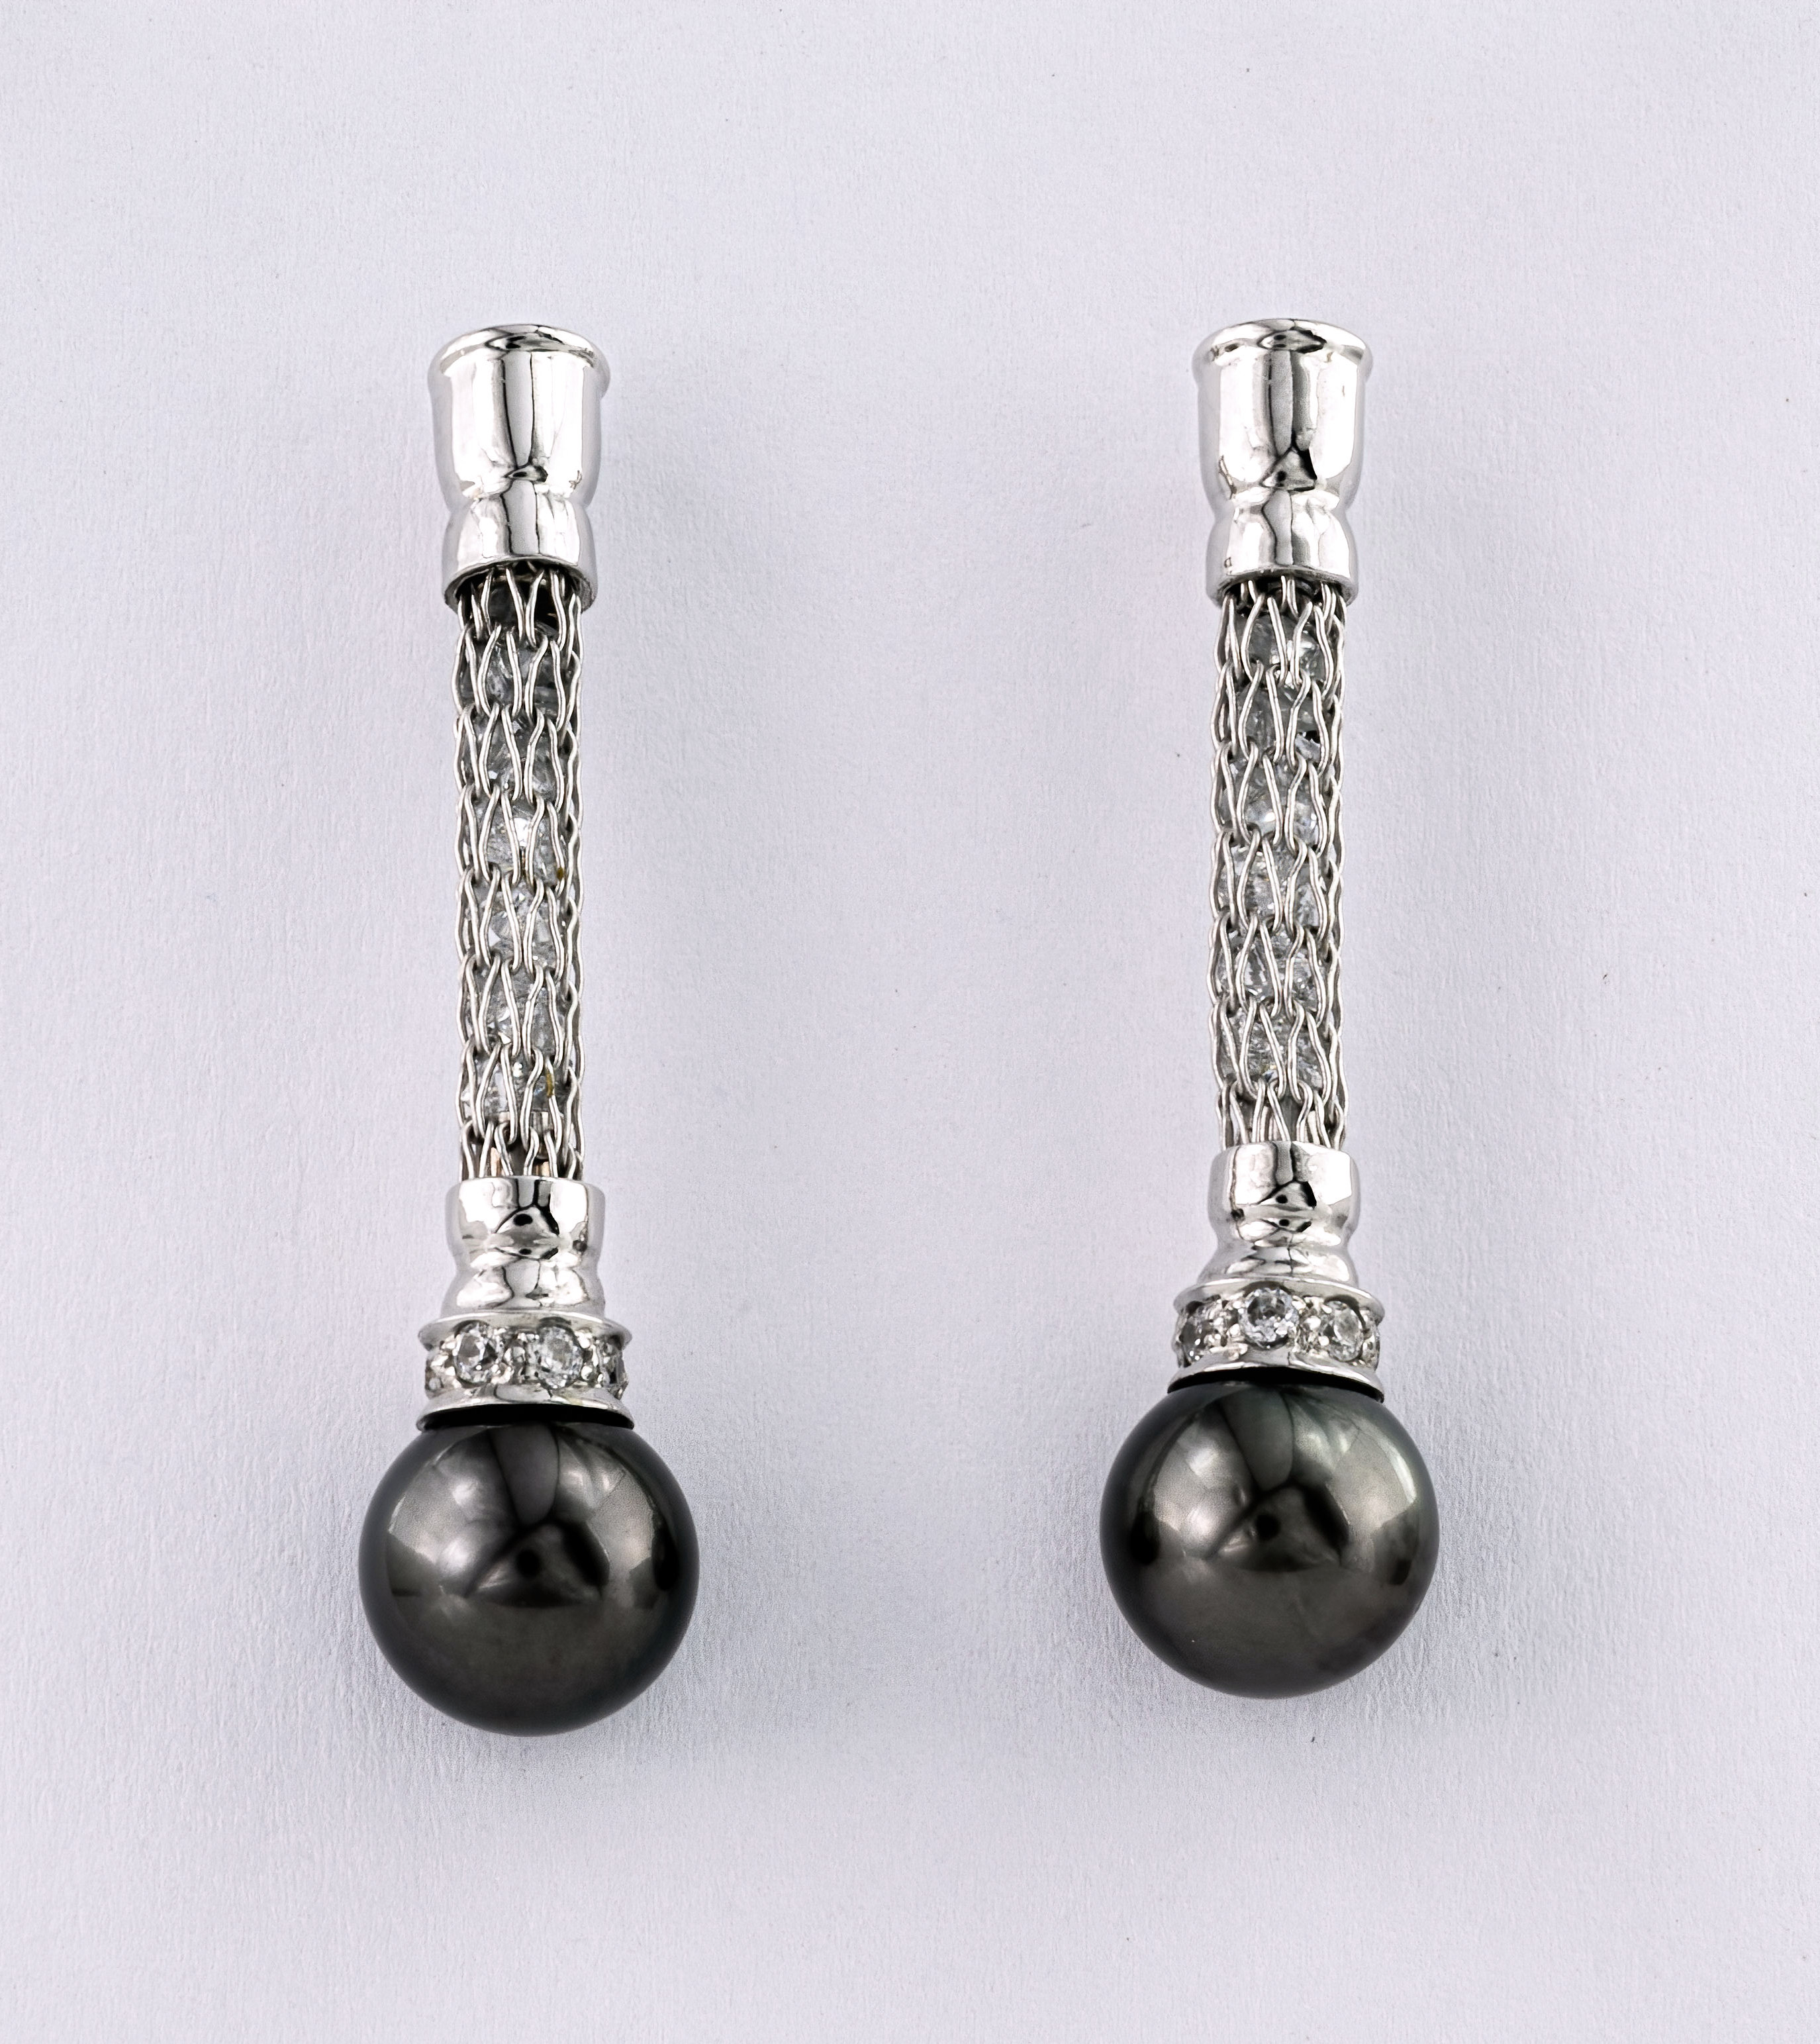 A pair of Na Hoku cubic zirconia and black pearl drop earrings, the cubic zirconium contained within